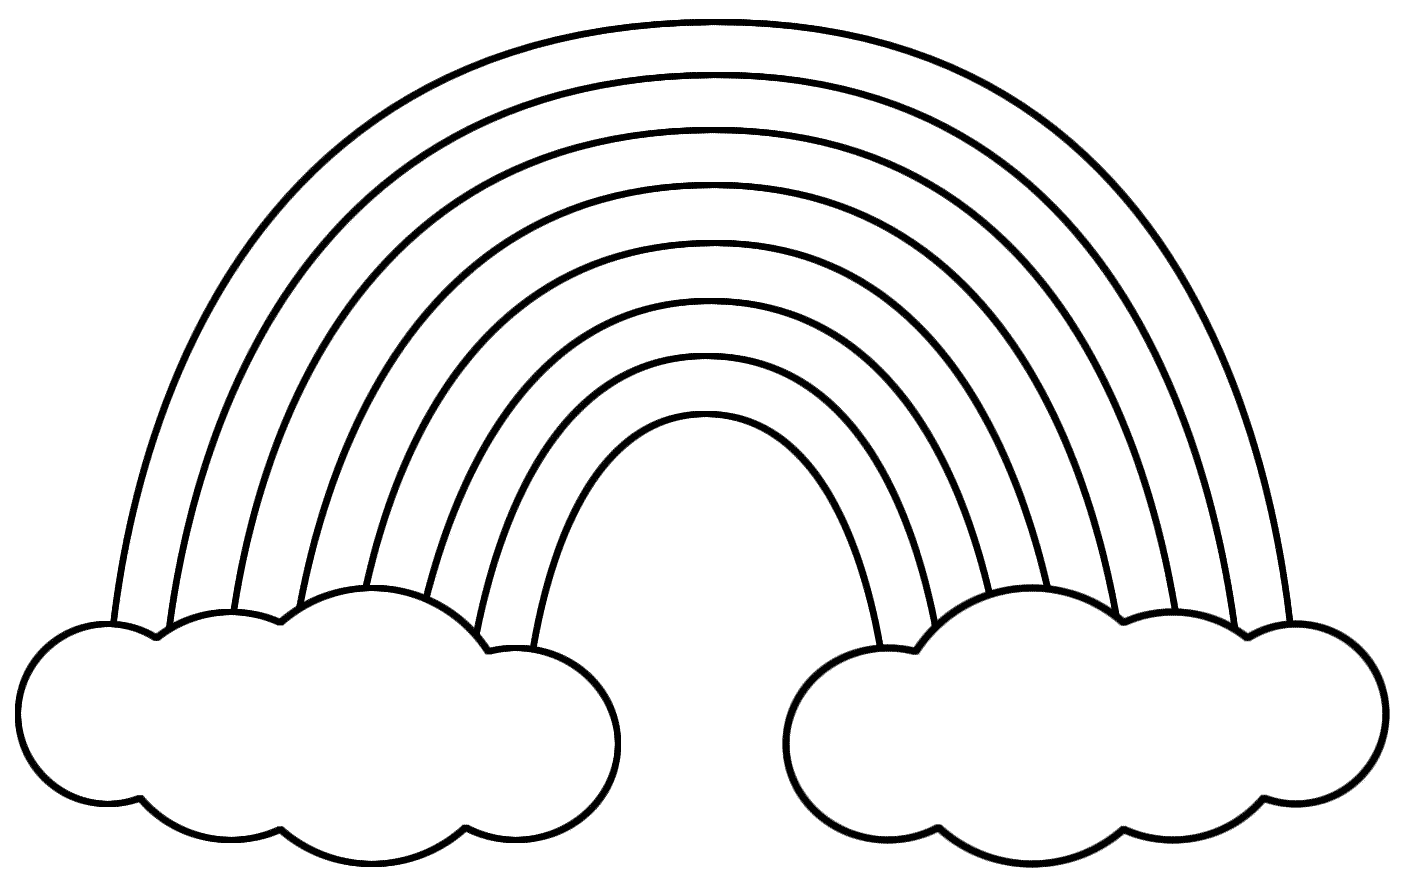 Rainbow black and white coloring page free cliparts